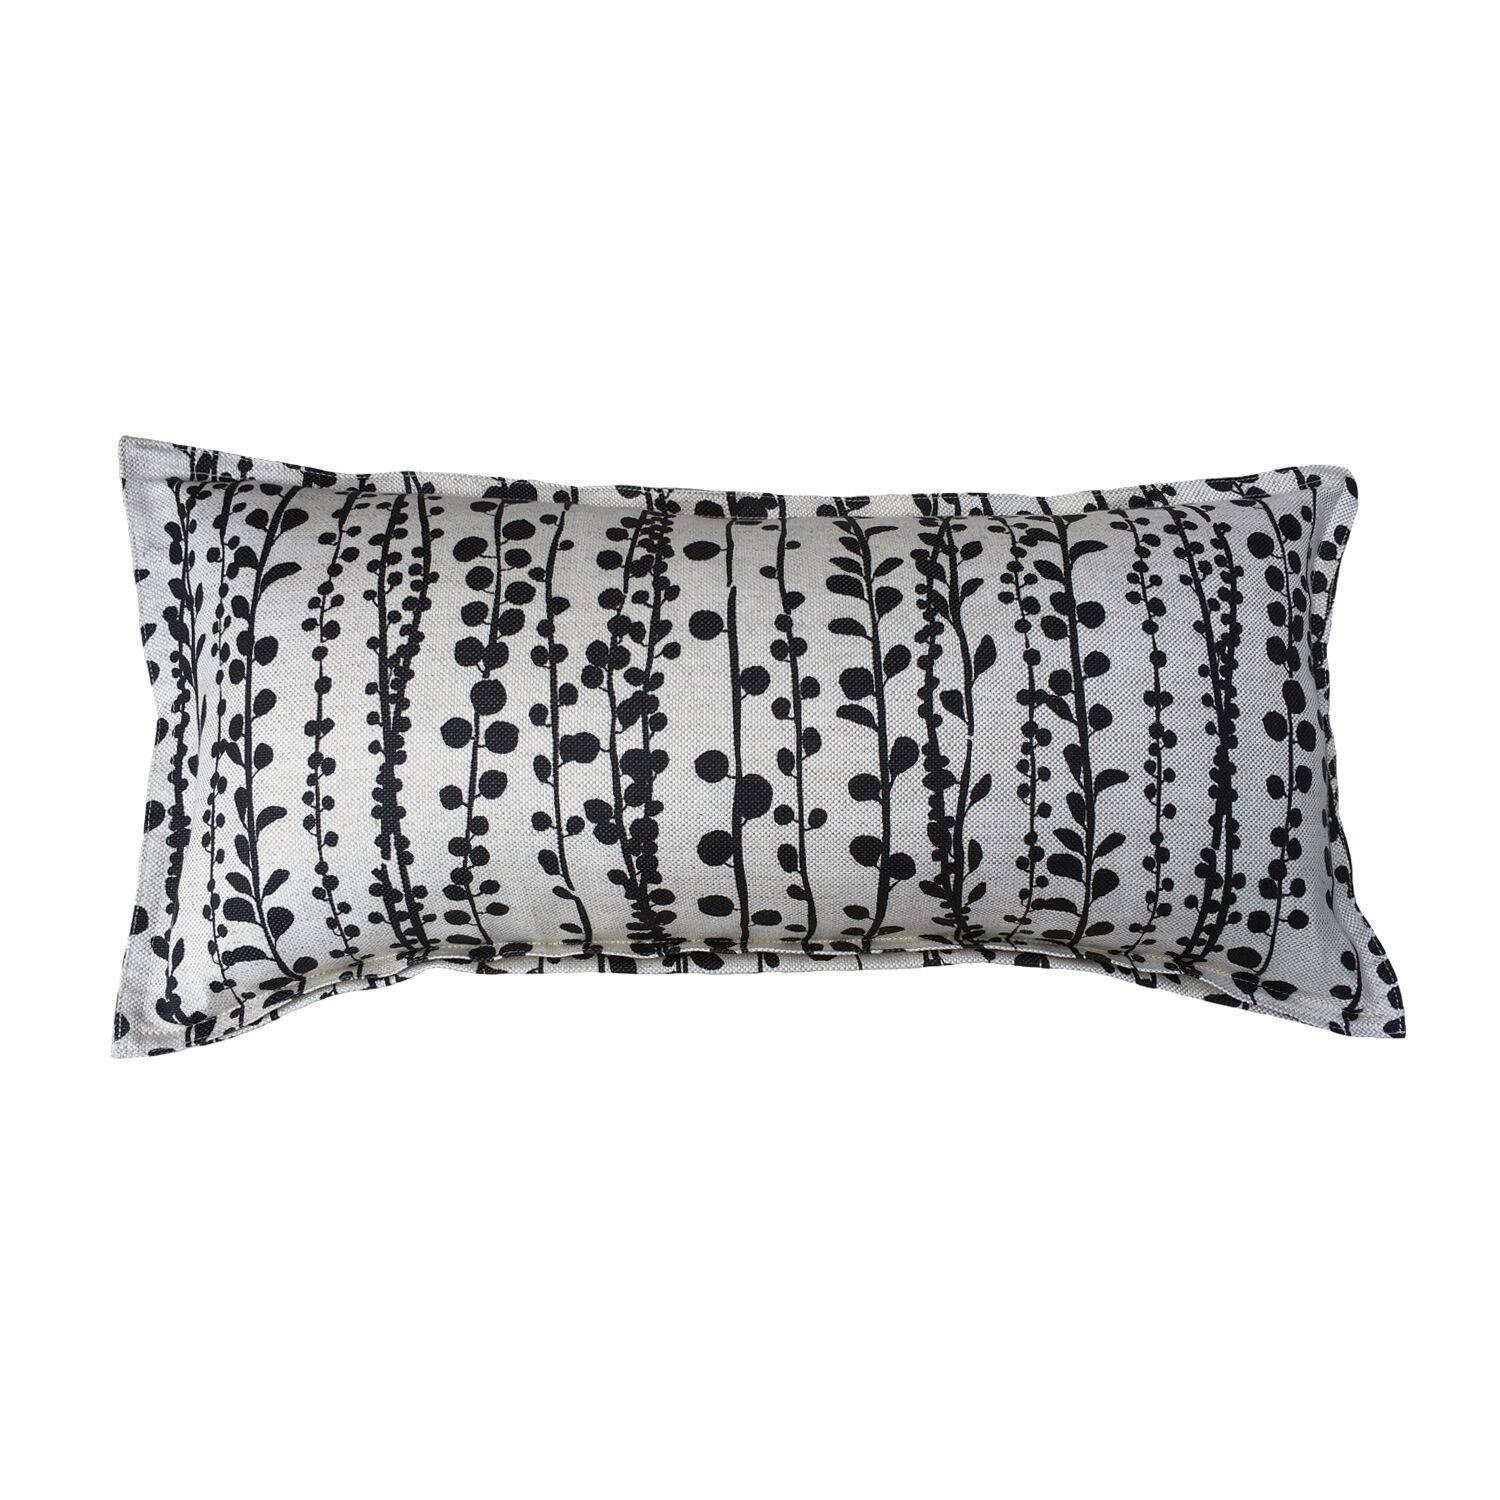 Slate Pearl on Wheat Cotton Linen Pillow For Sale